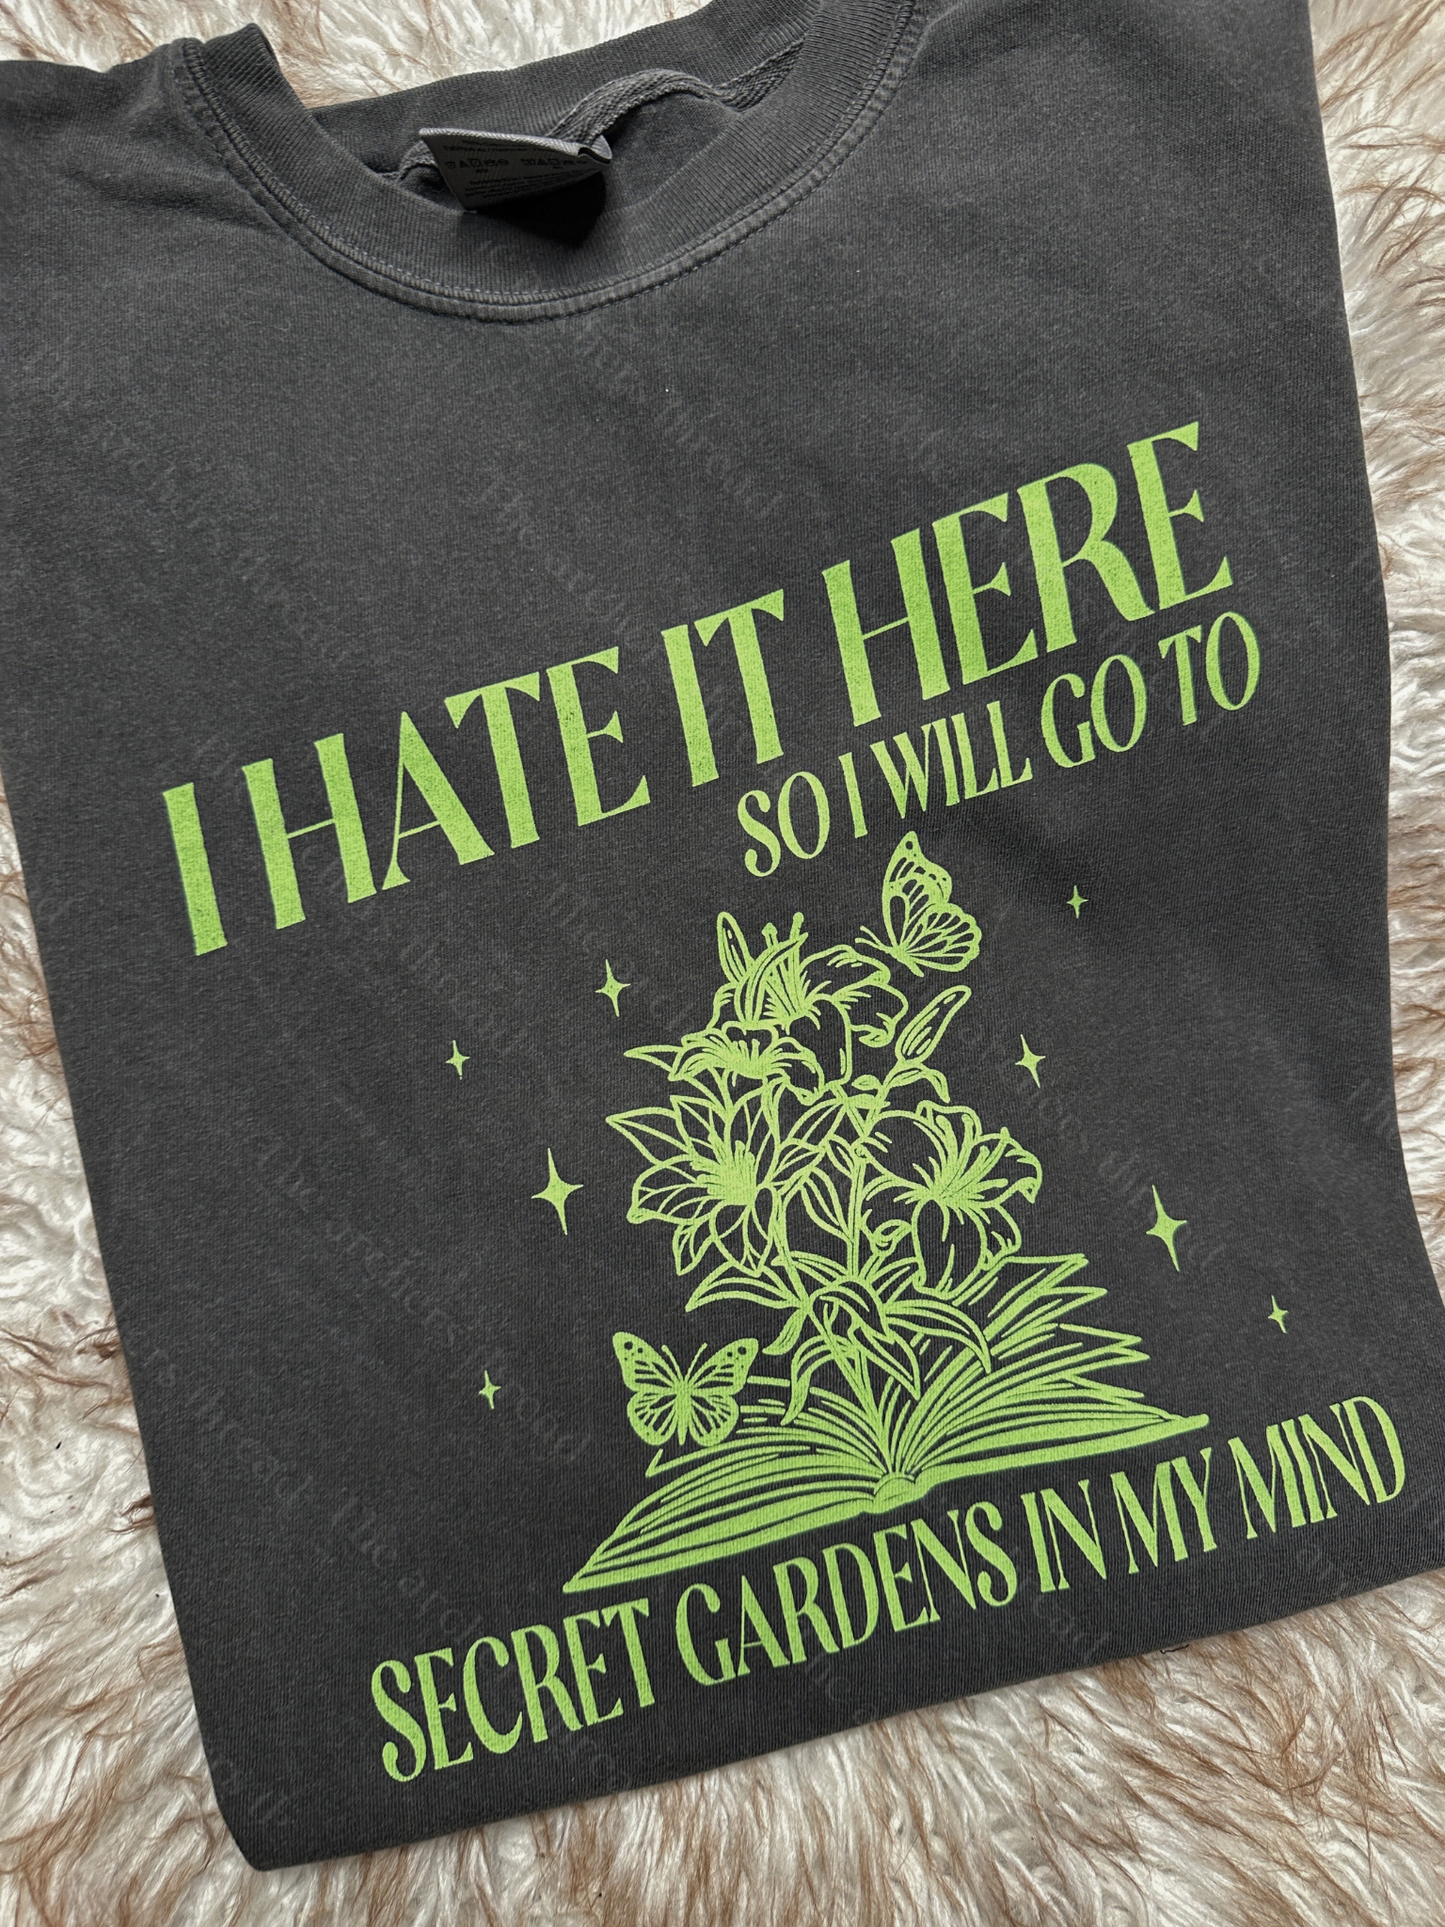 I hate it here bookish merch